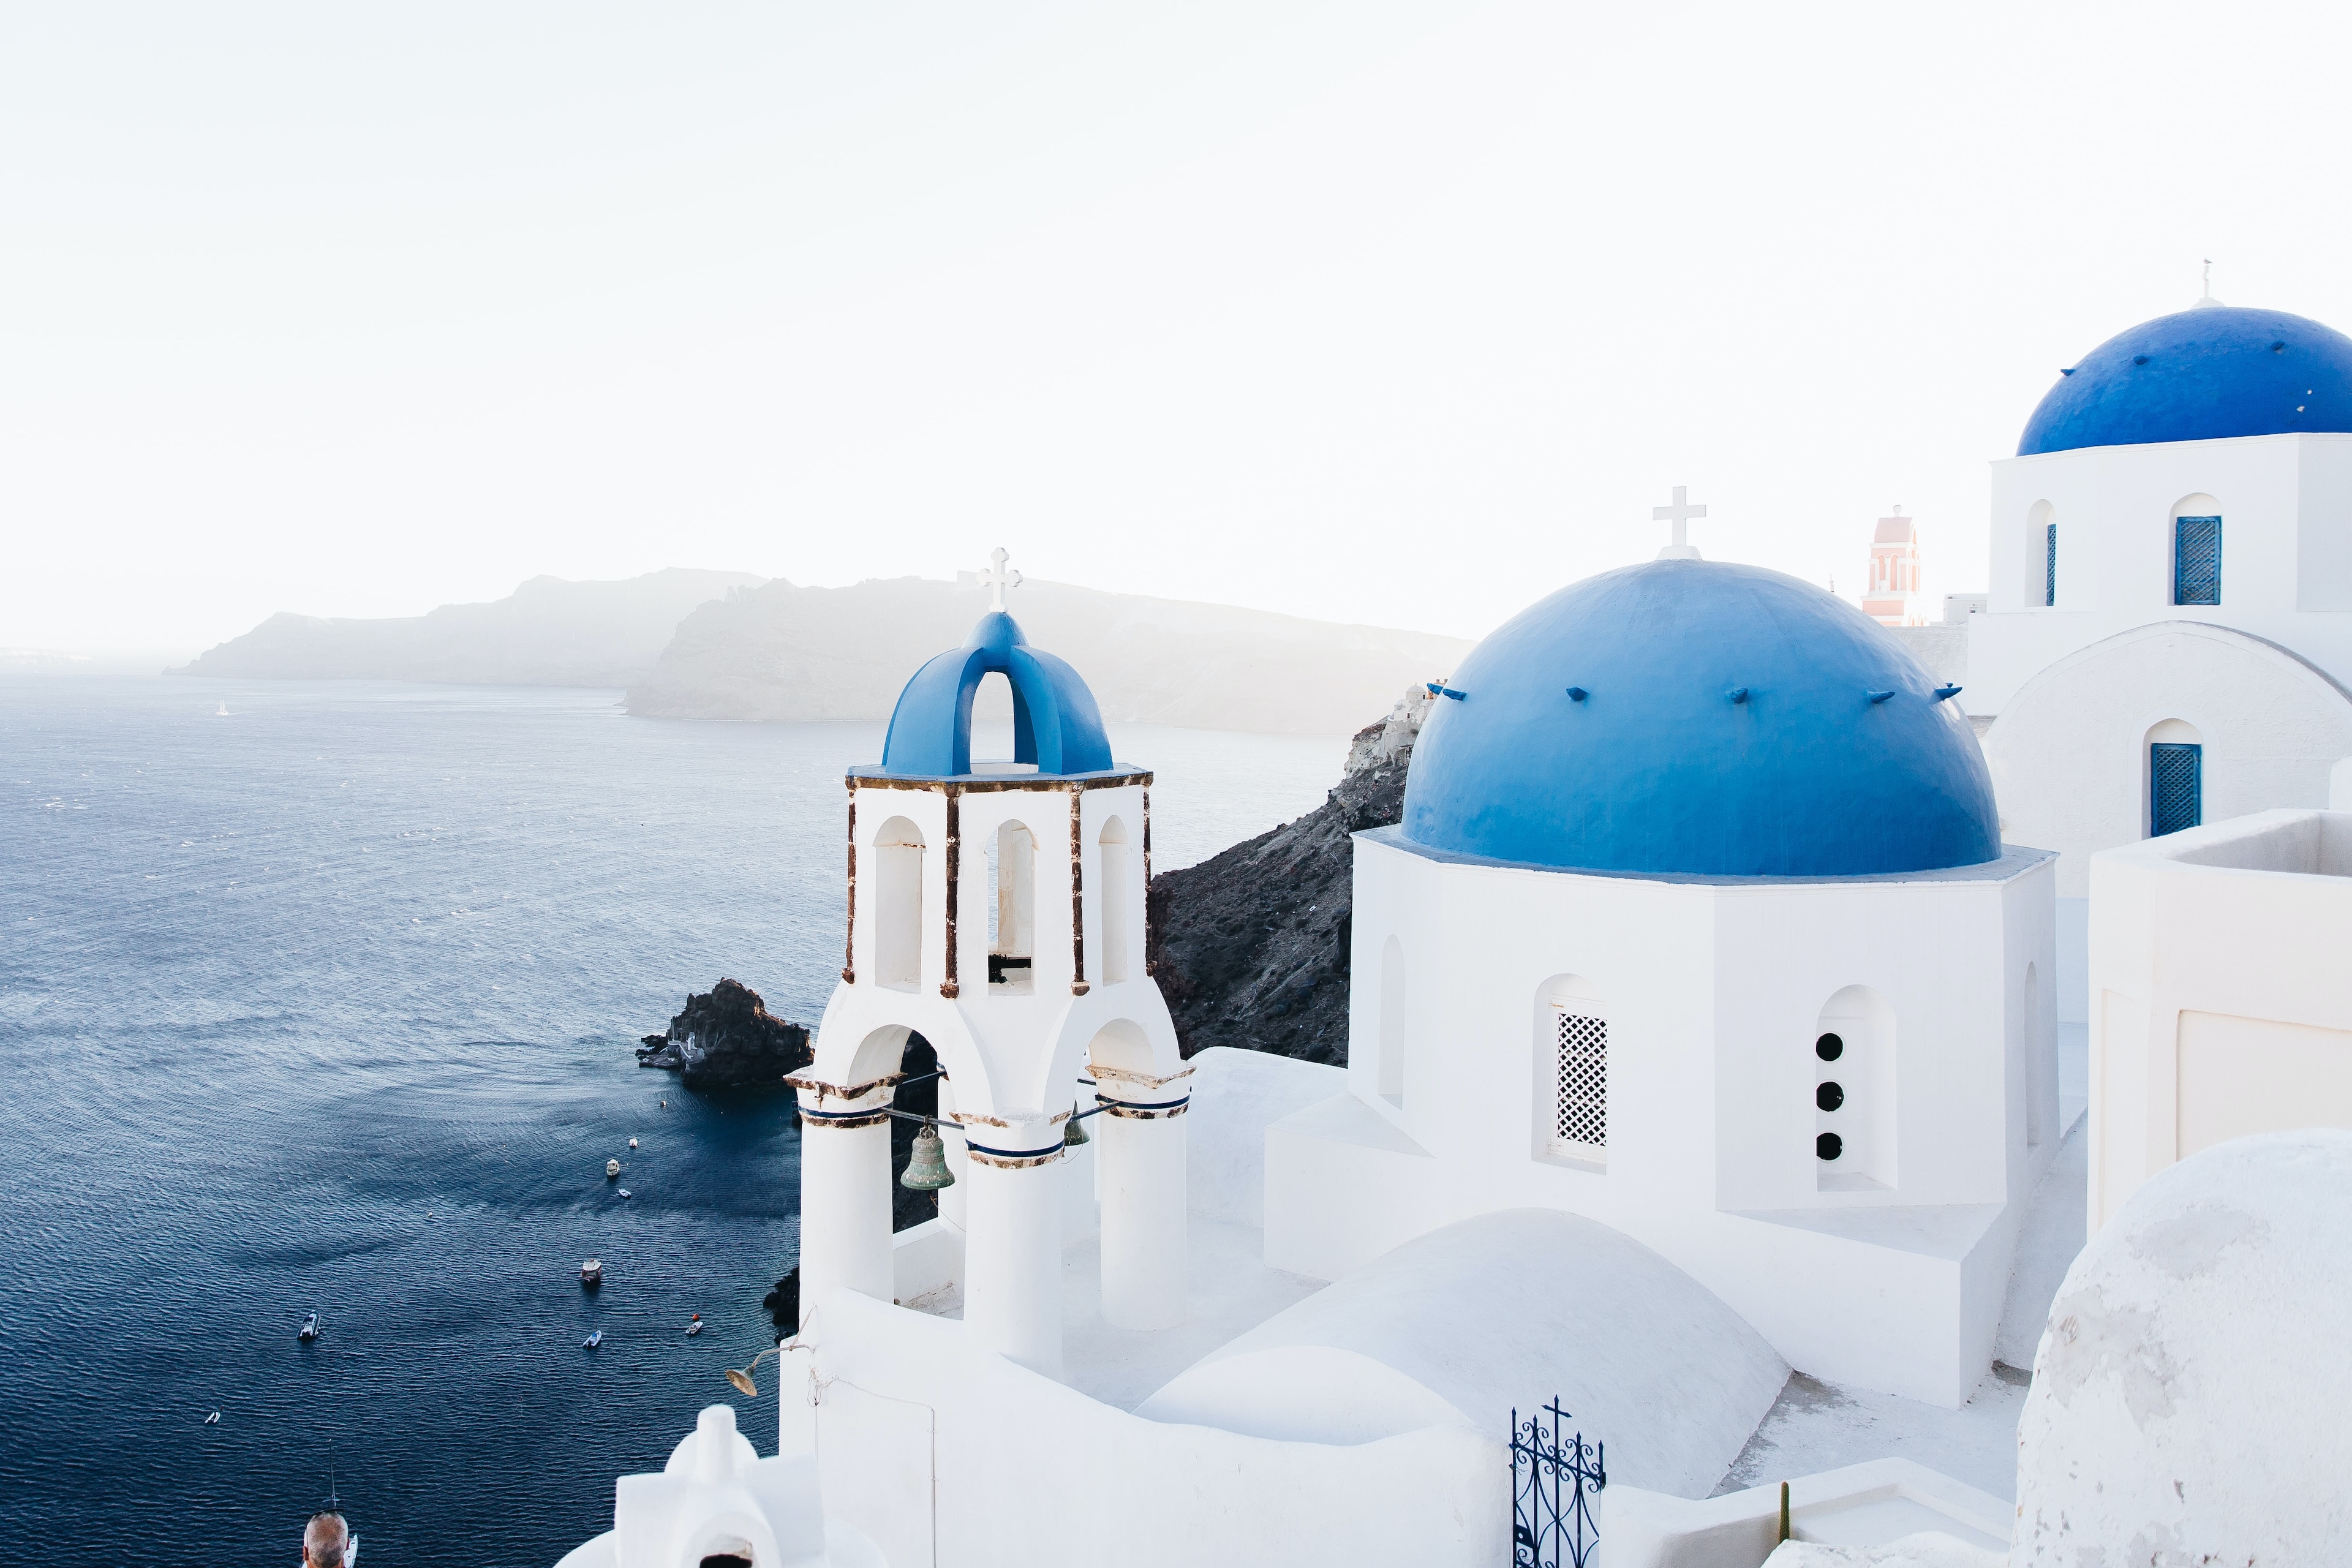 All You Need to Know about Greece Visa for Indians